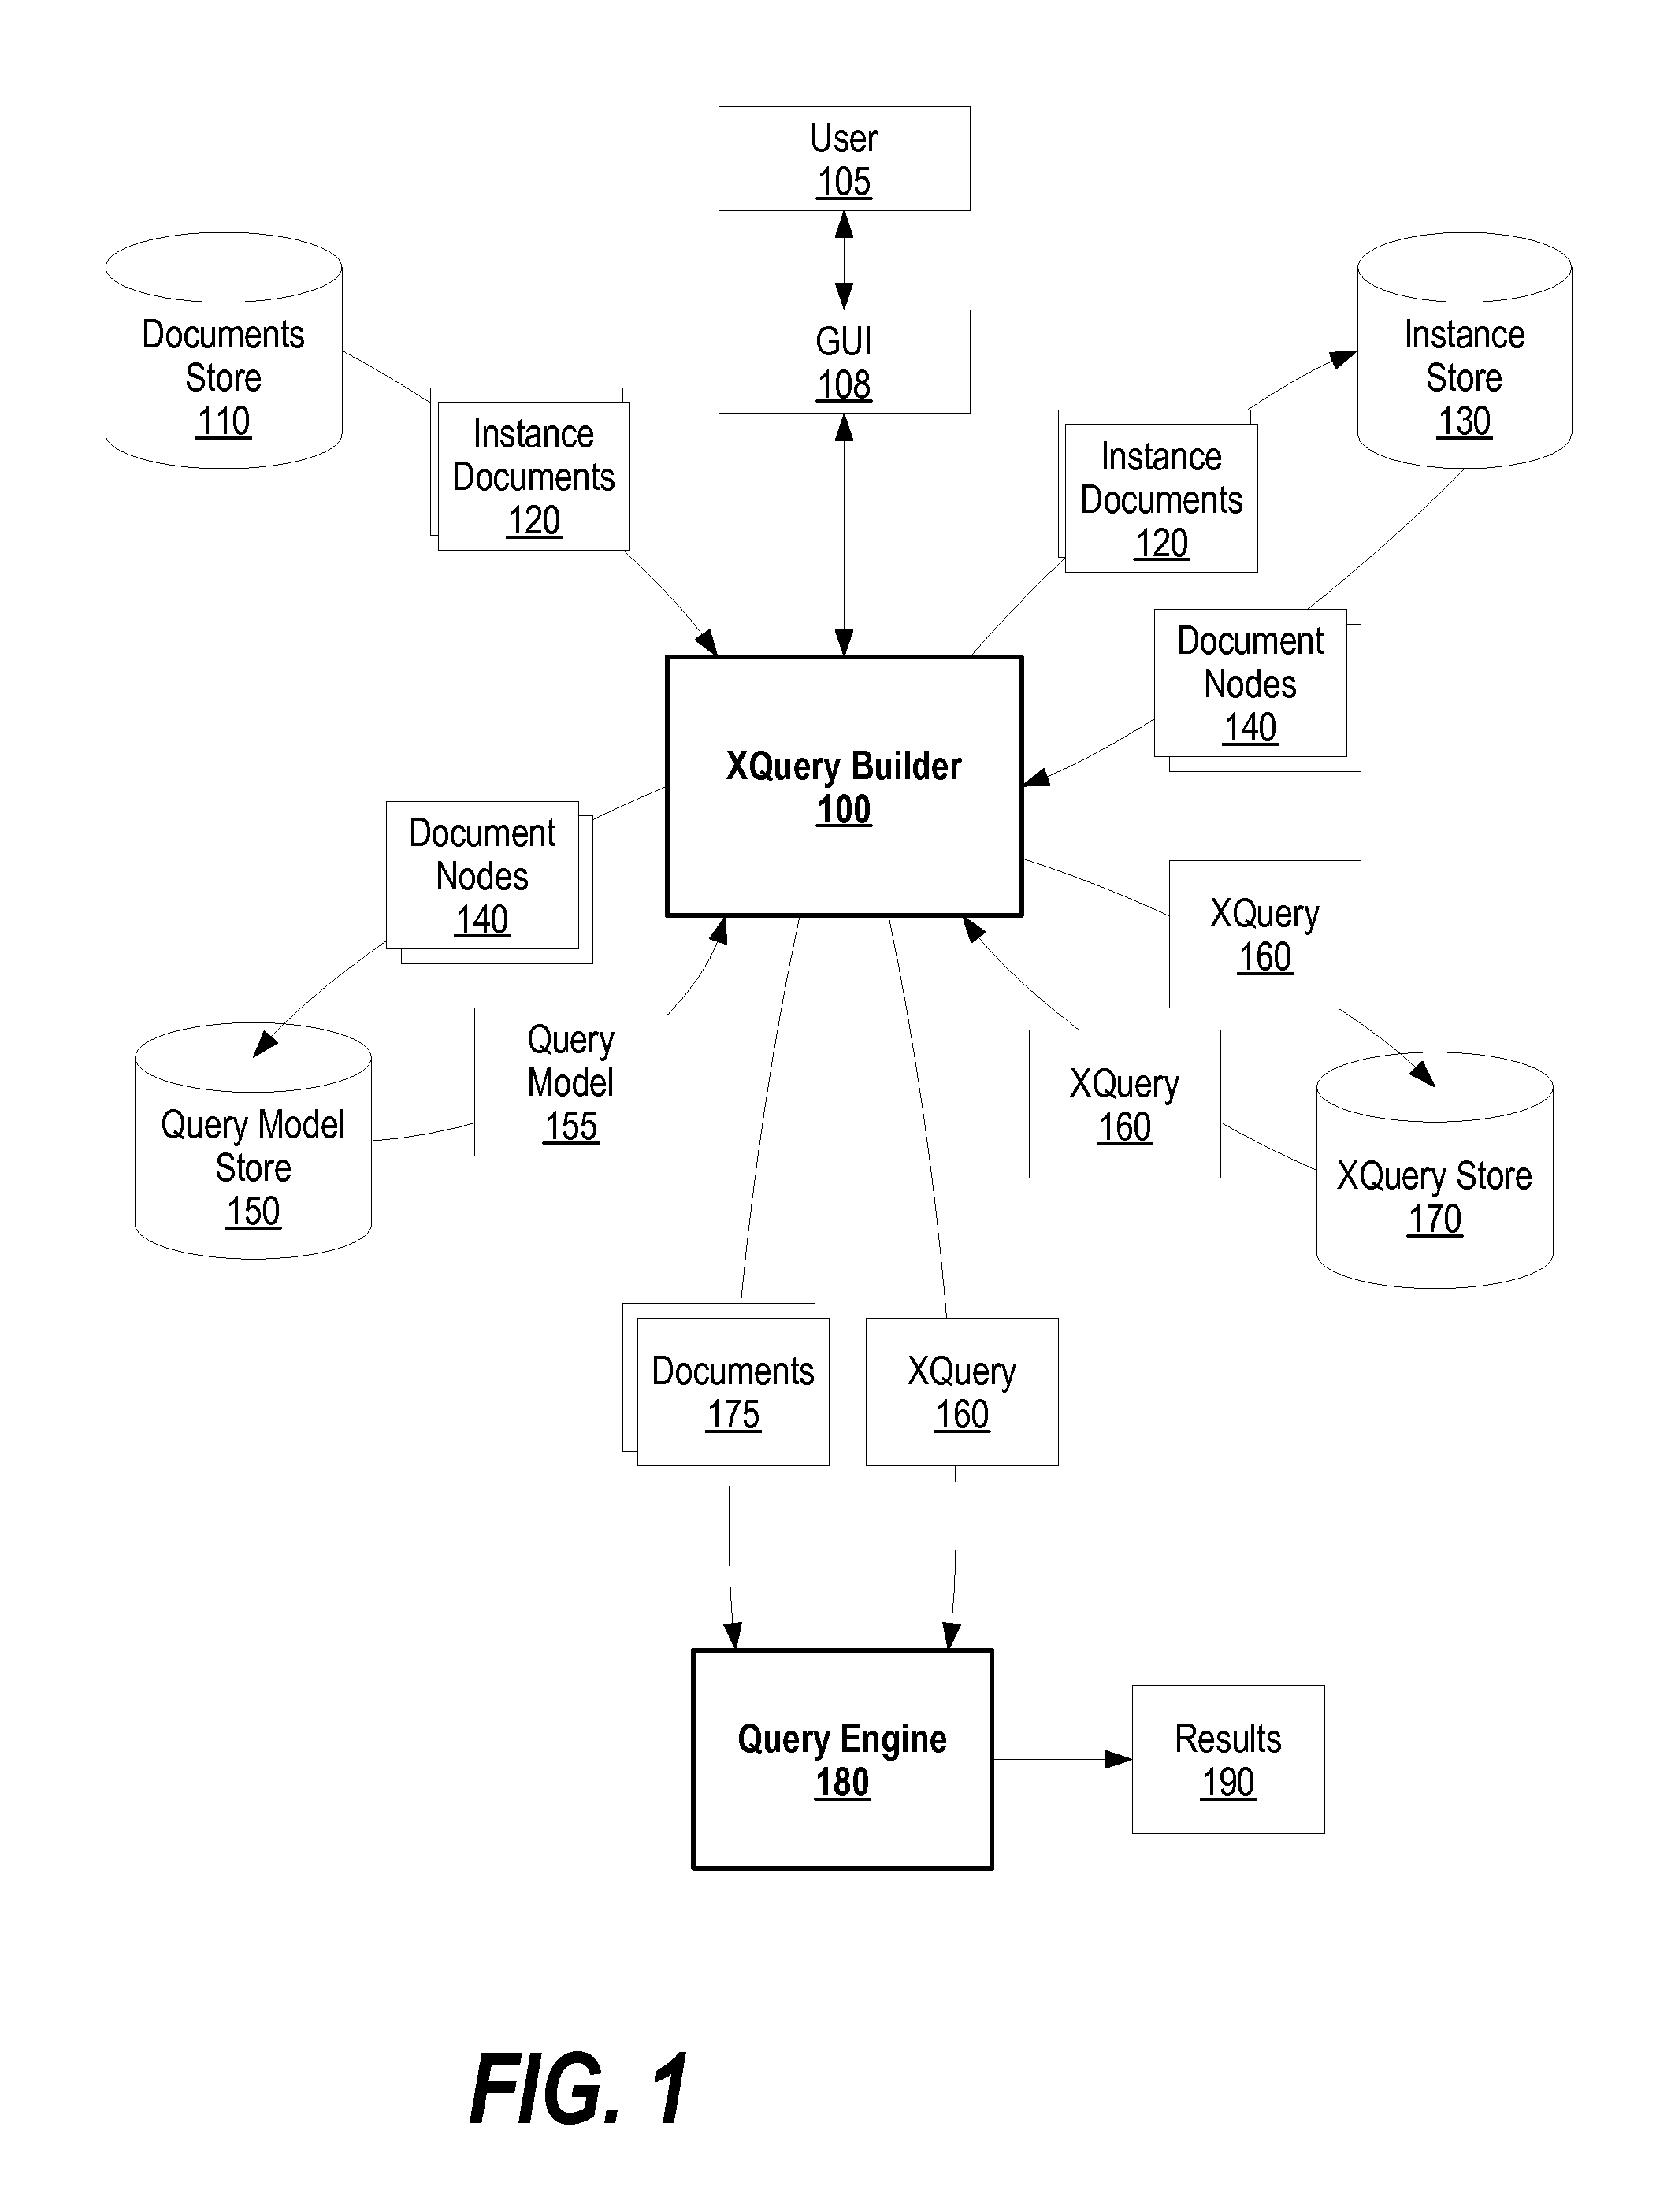 System and Method for Building an XQuery Using a Model-Based XQuery Building Tool